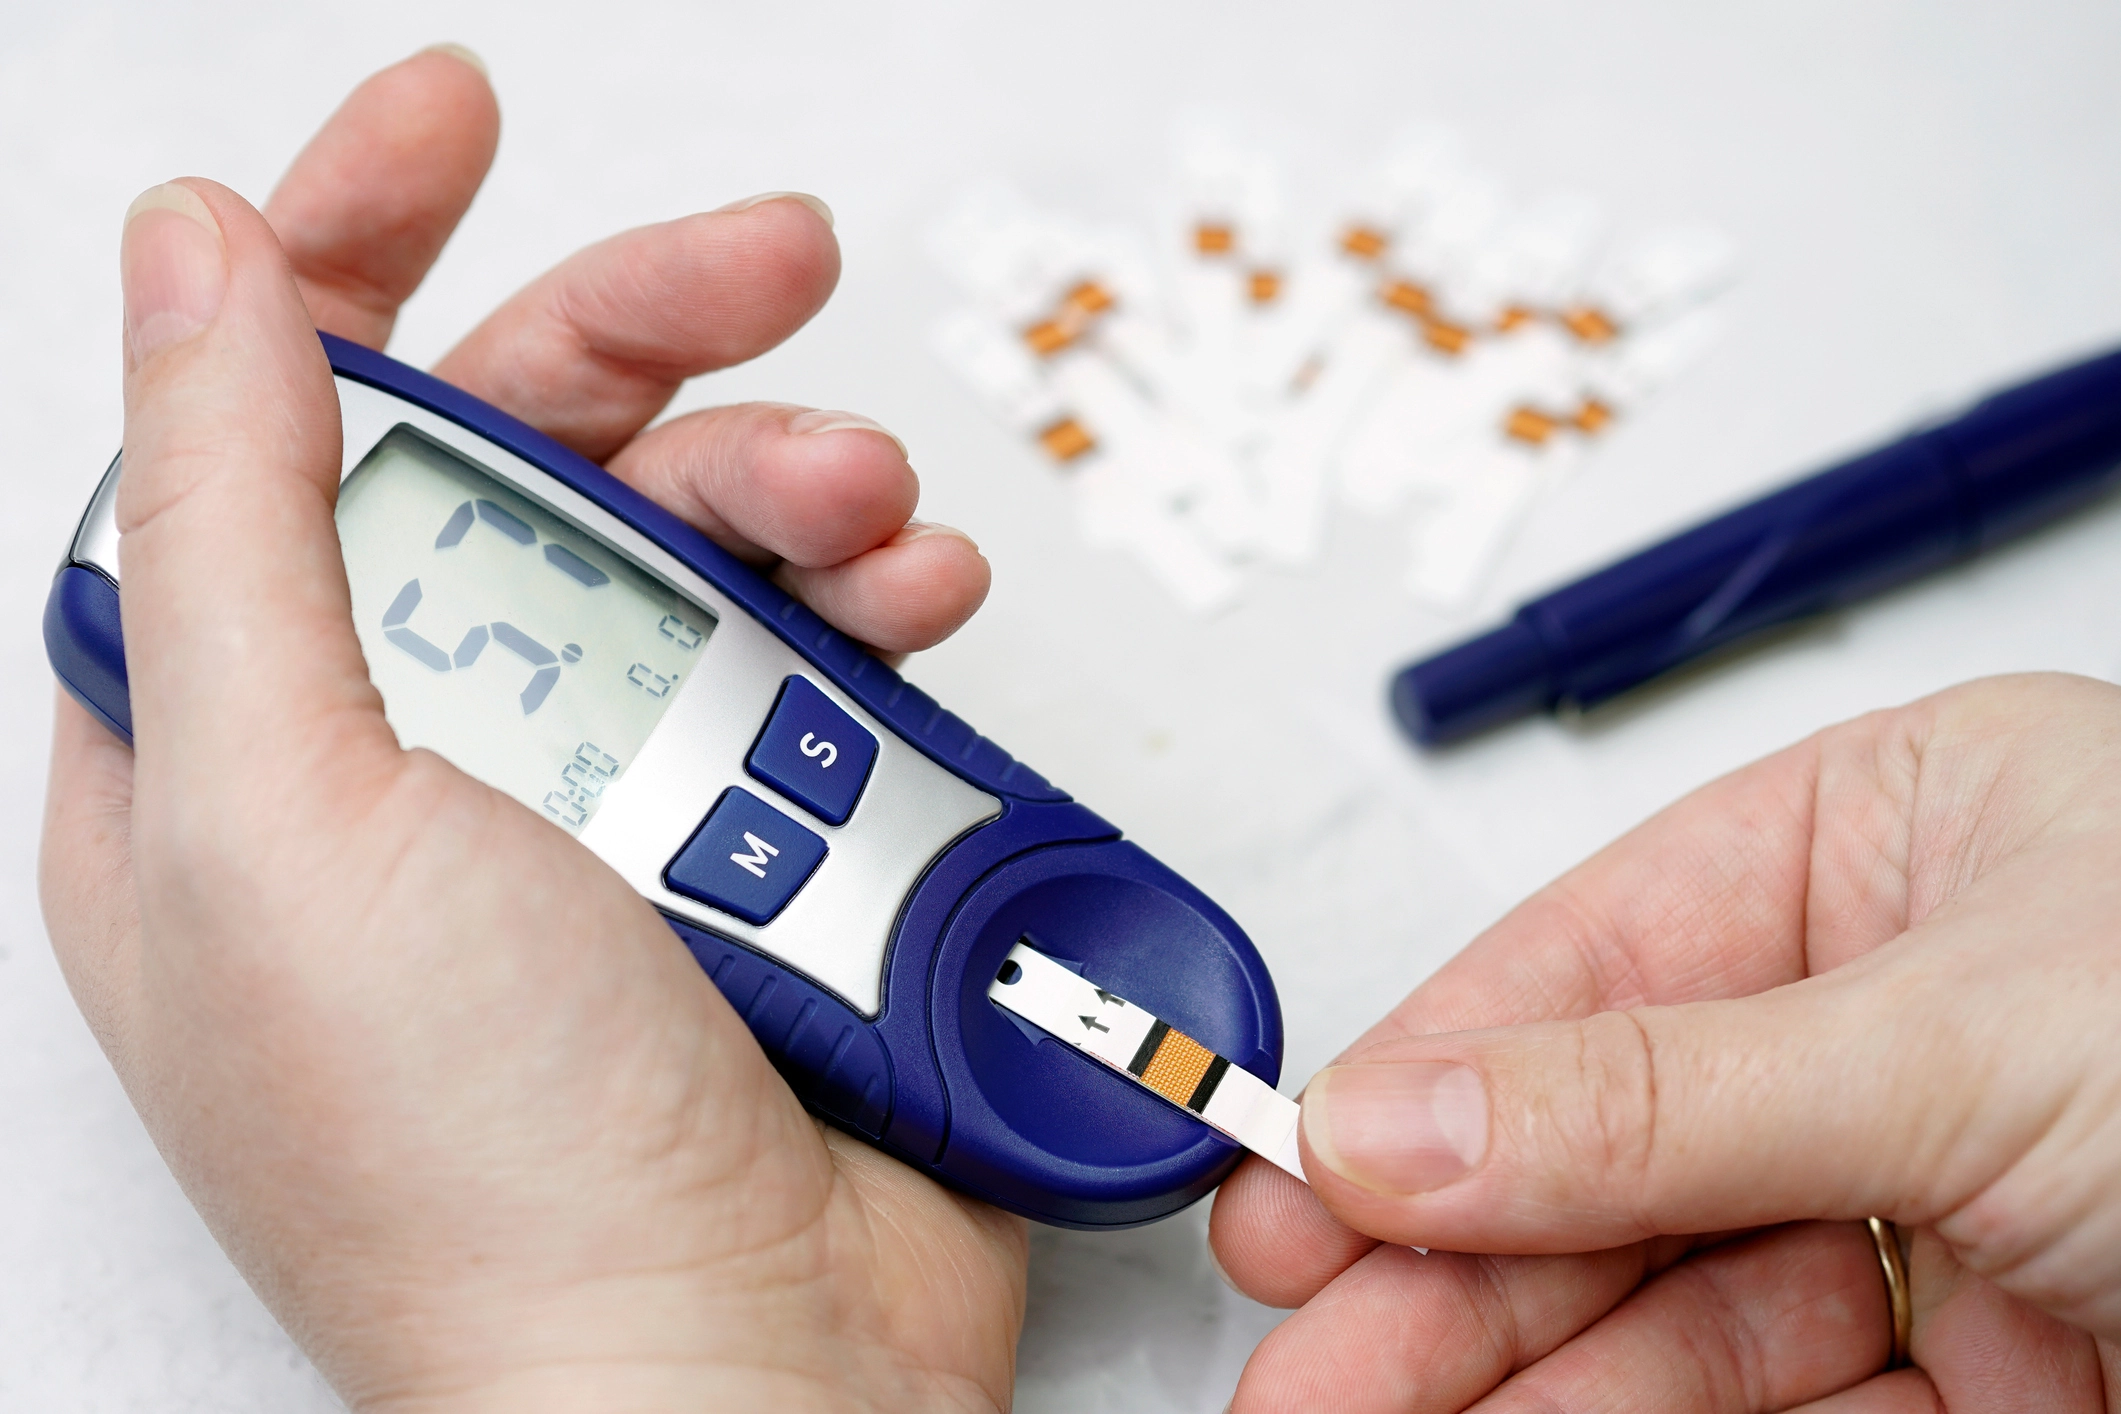 WHY SHOULD NON-DIABETICS LOOK AT THEIR BLOOD SUGAR LEVELS